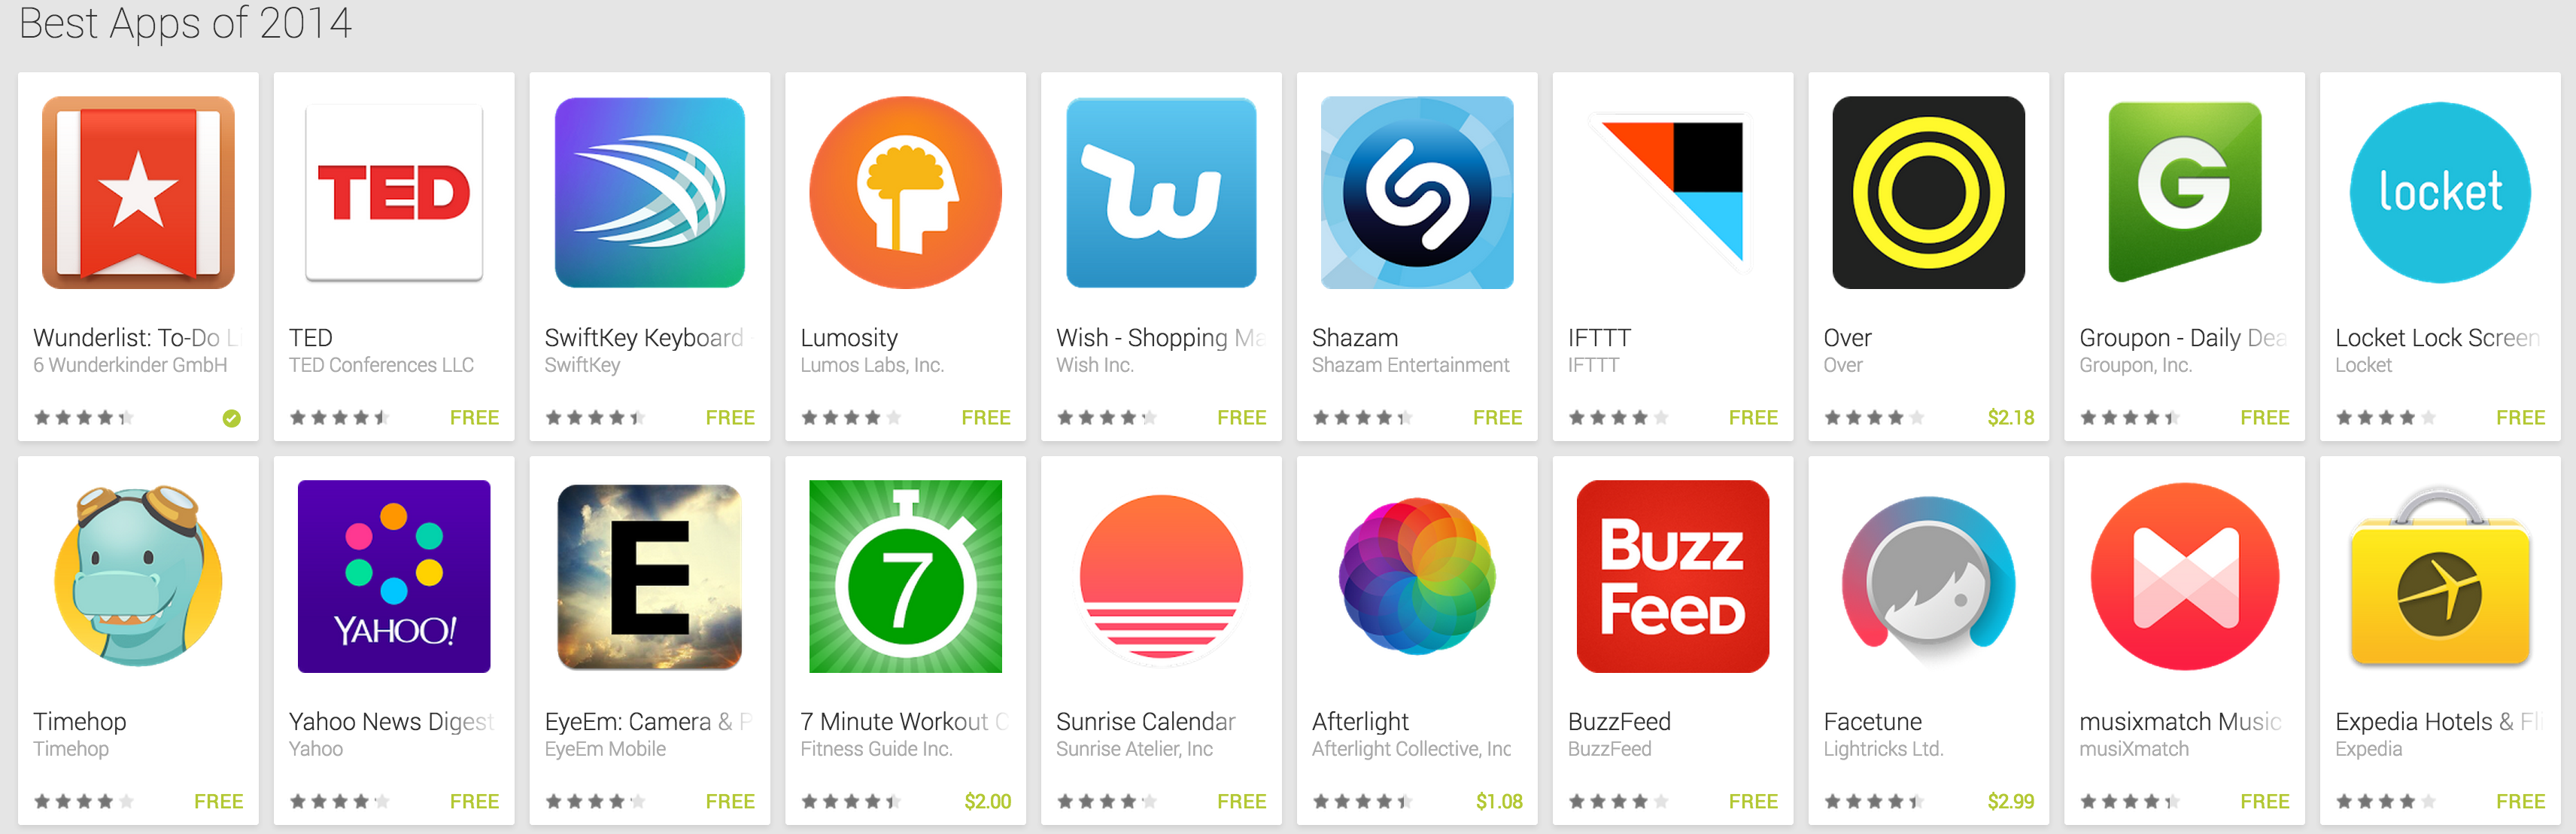 google-play-store-shares-its-best-apps-of-2014-list